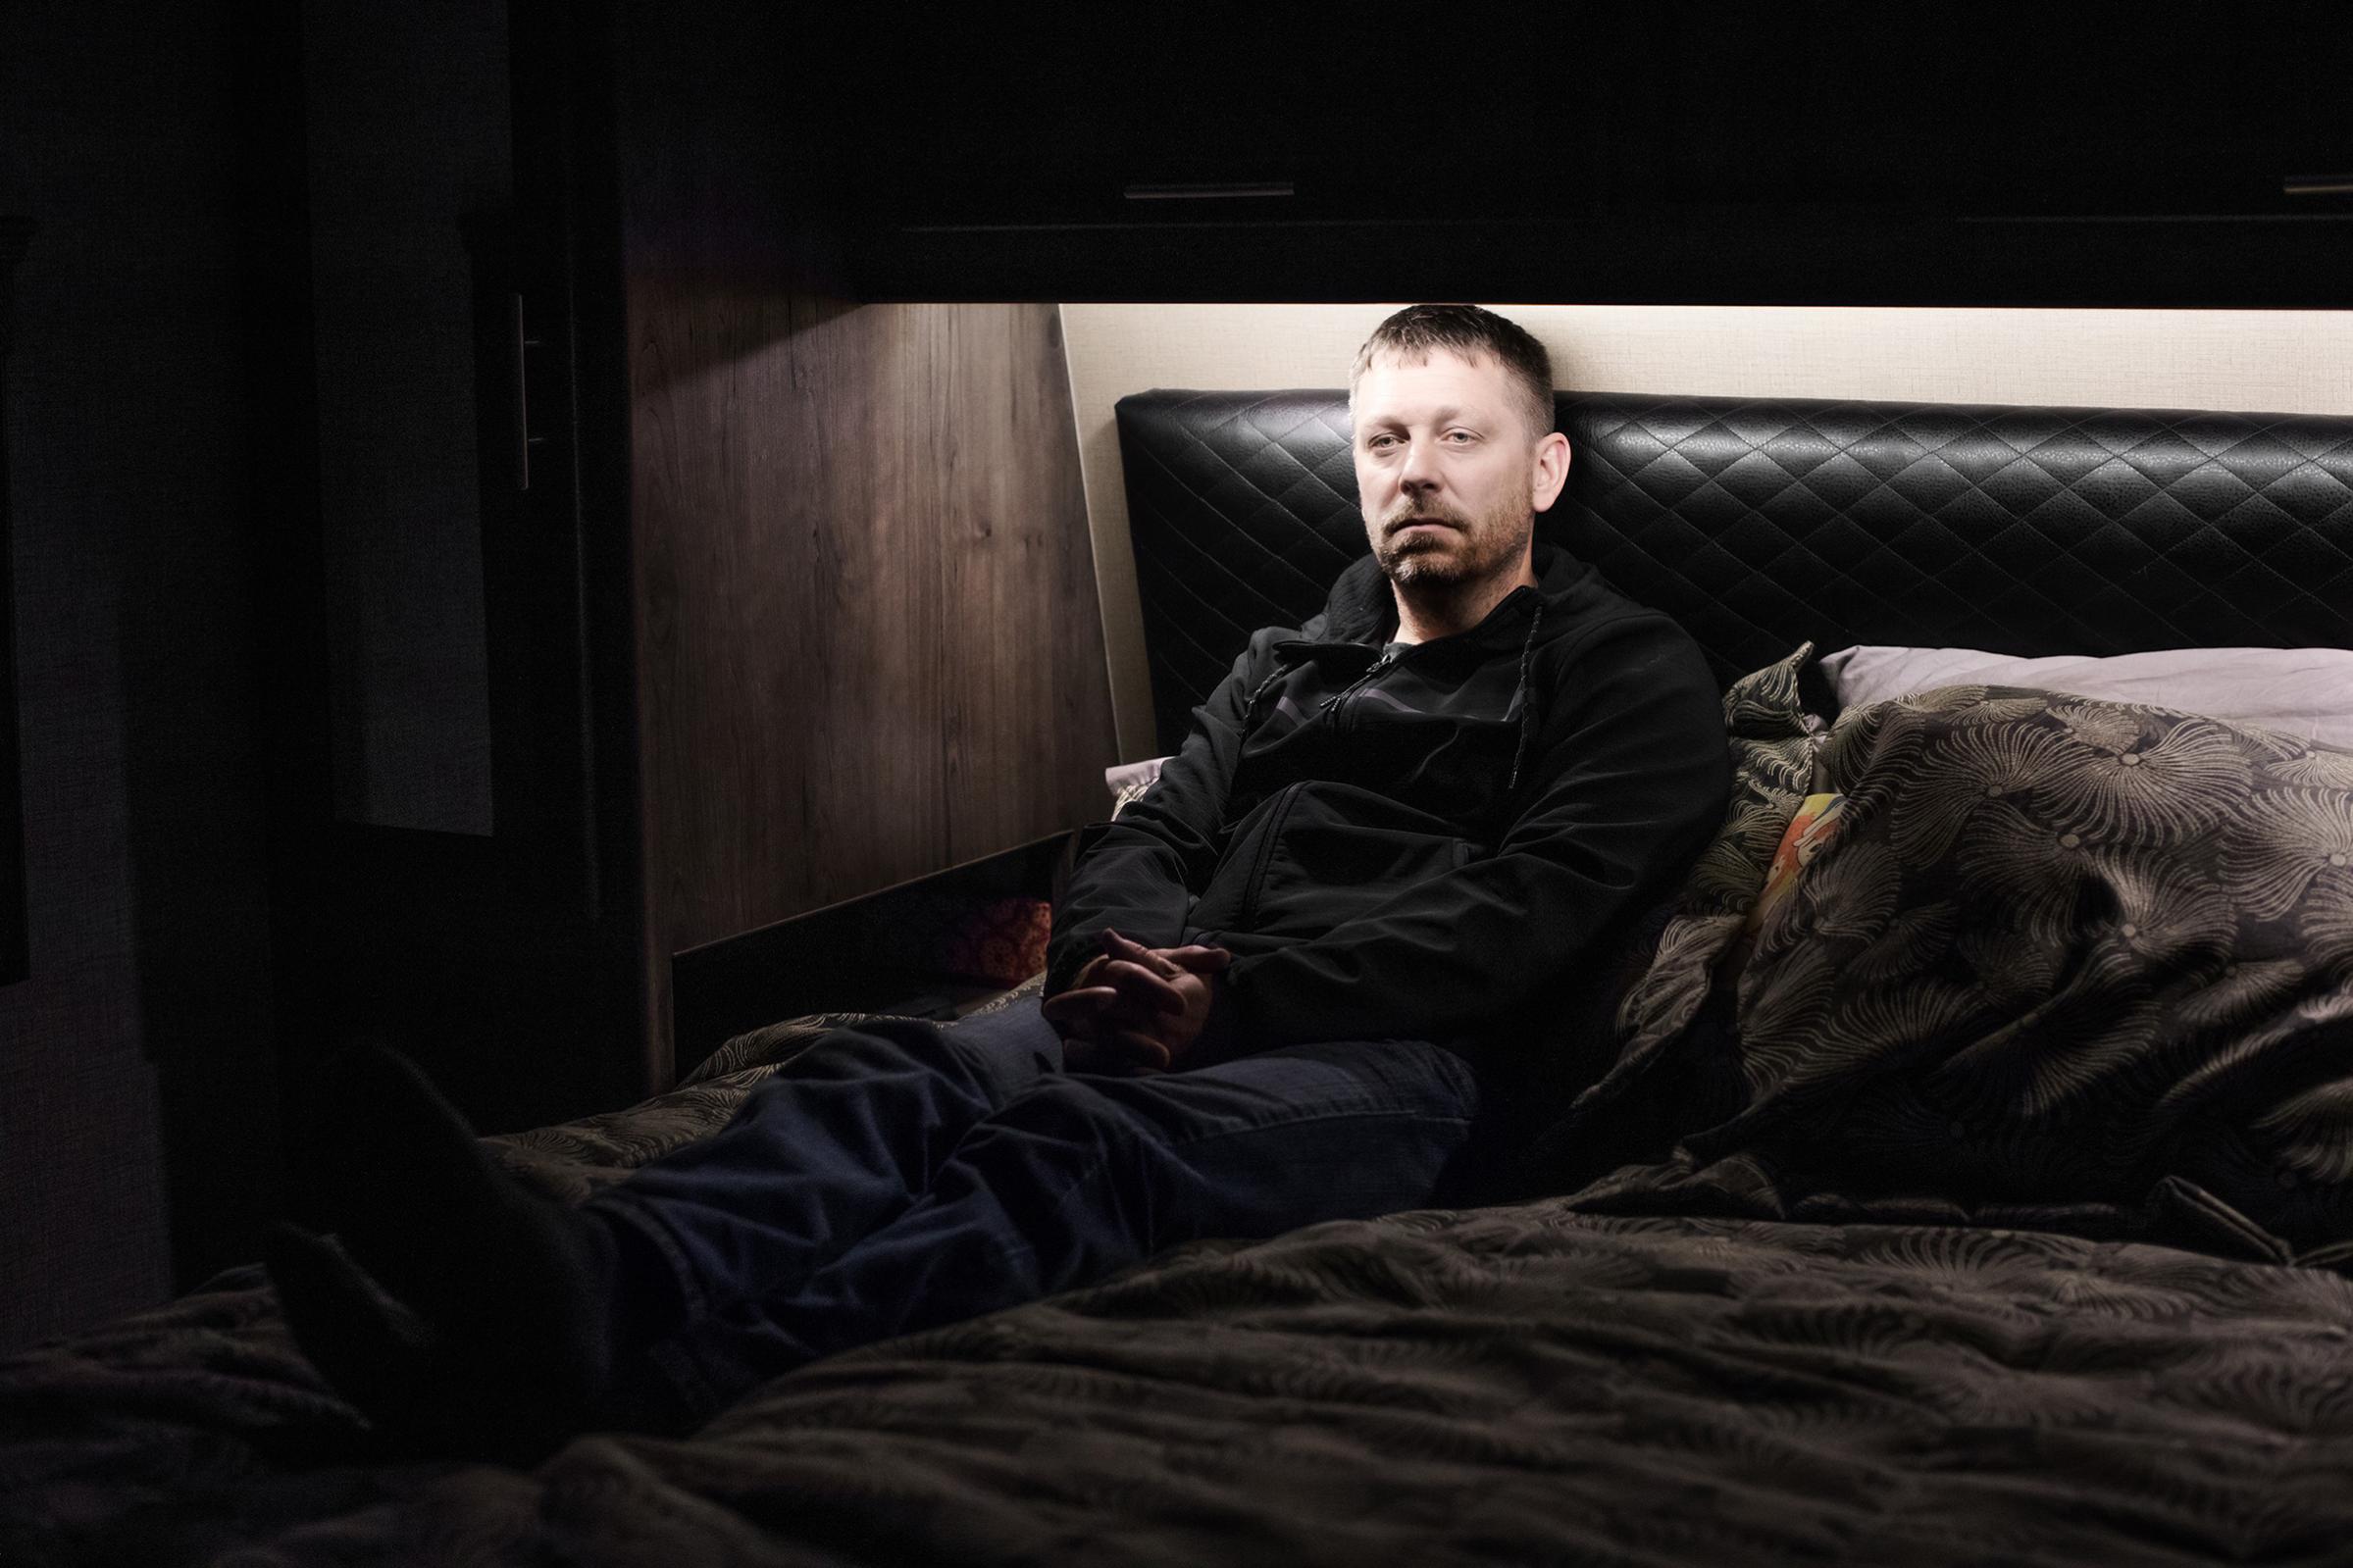 Brown, pictured in an RV where his family stayed after the fire